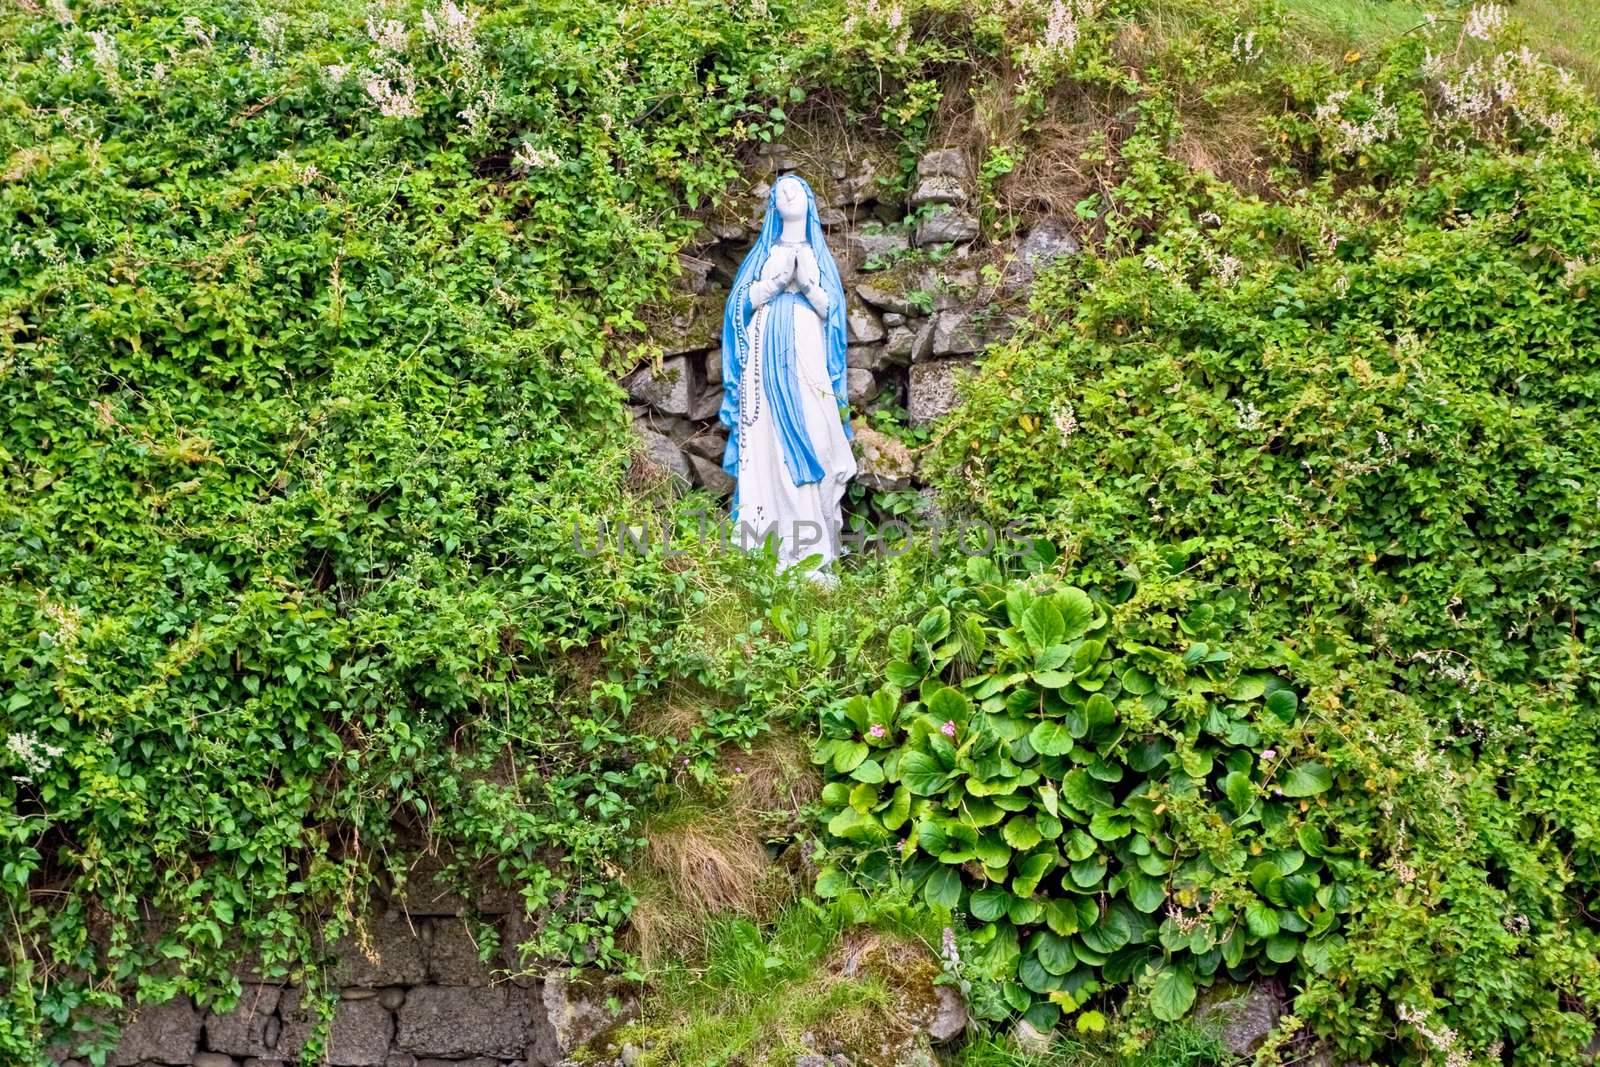 A statue of Virgin Mary on a hill surrounded by foliage